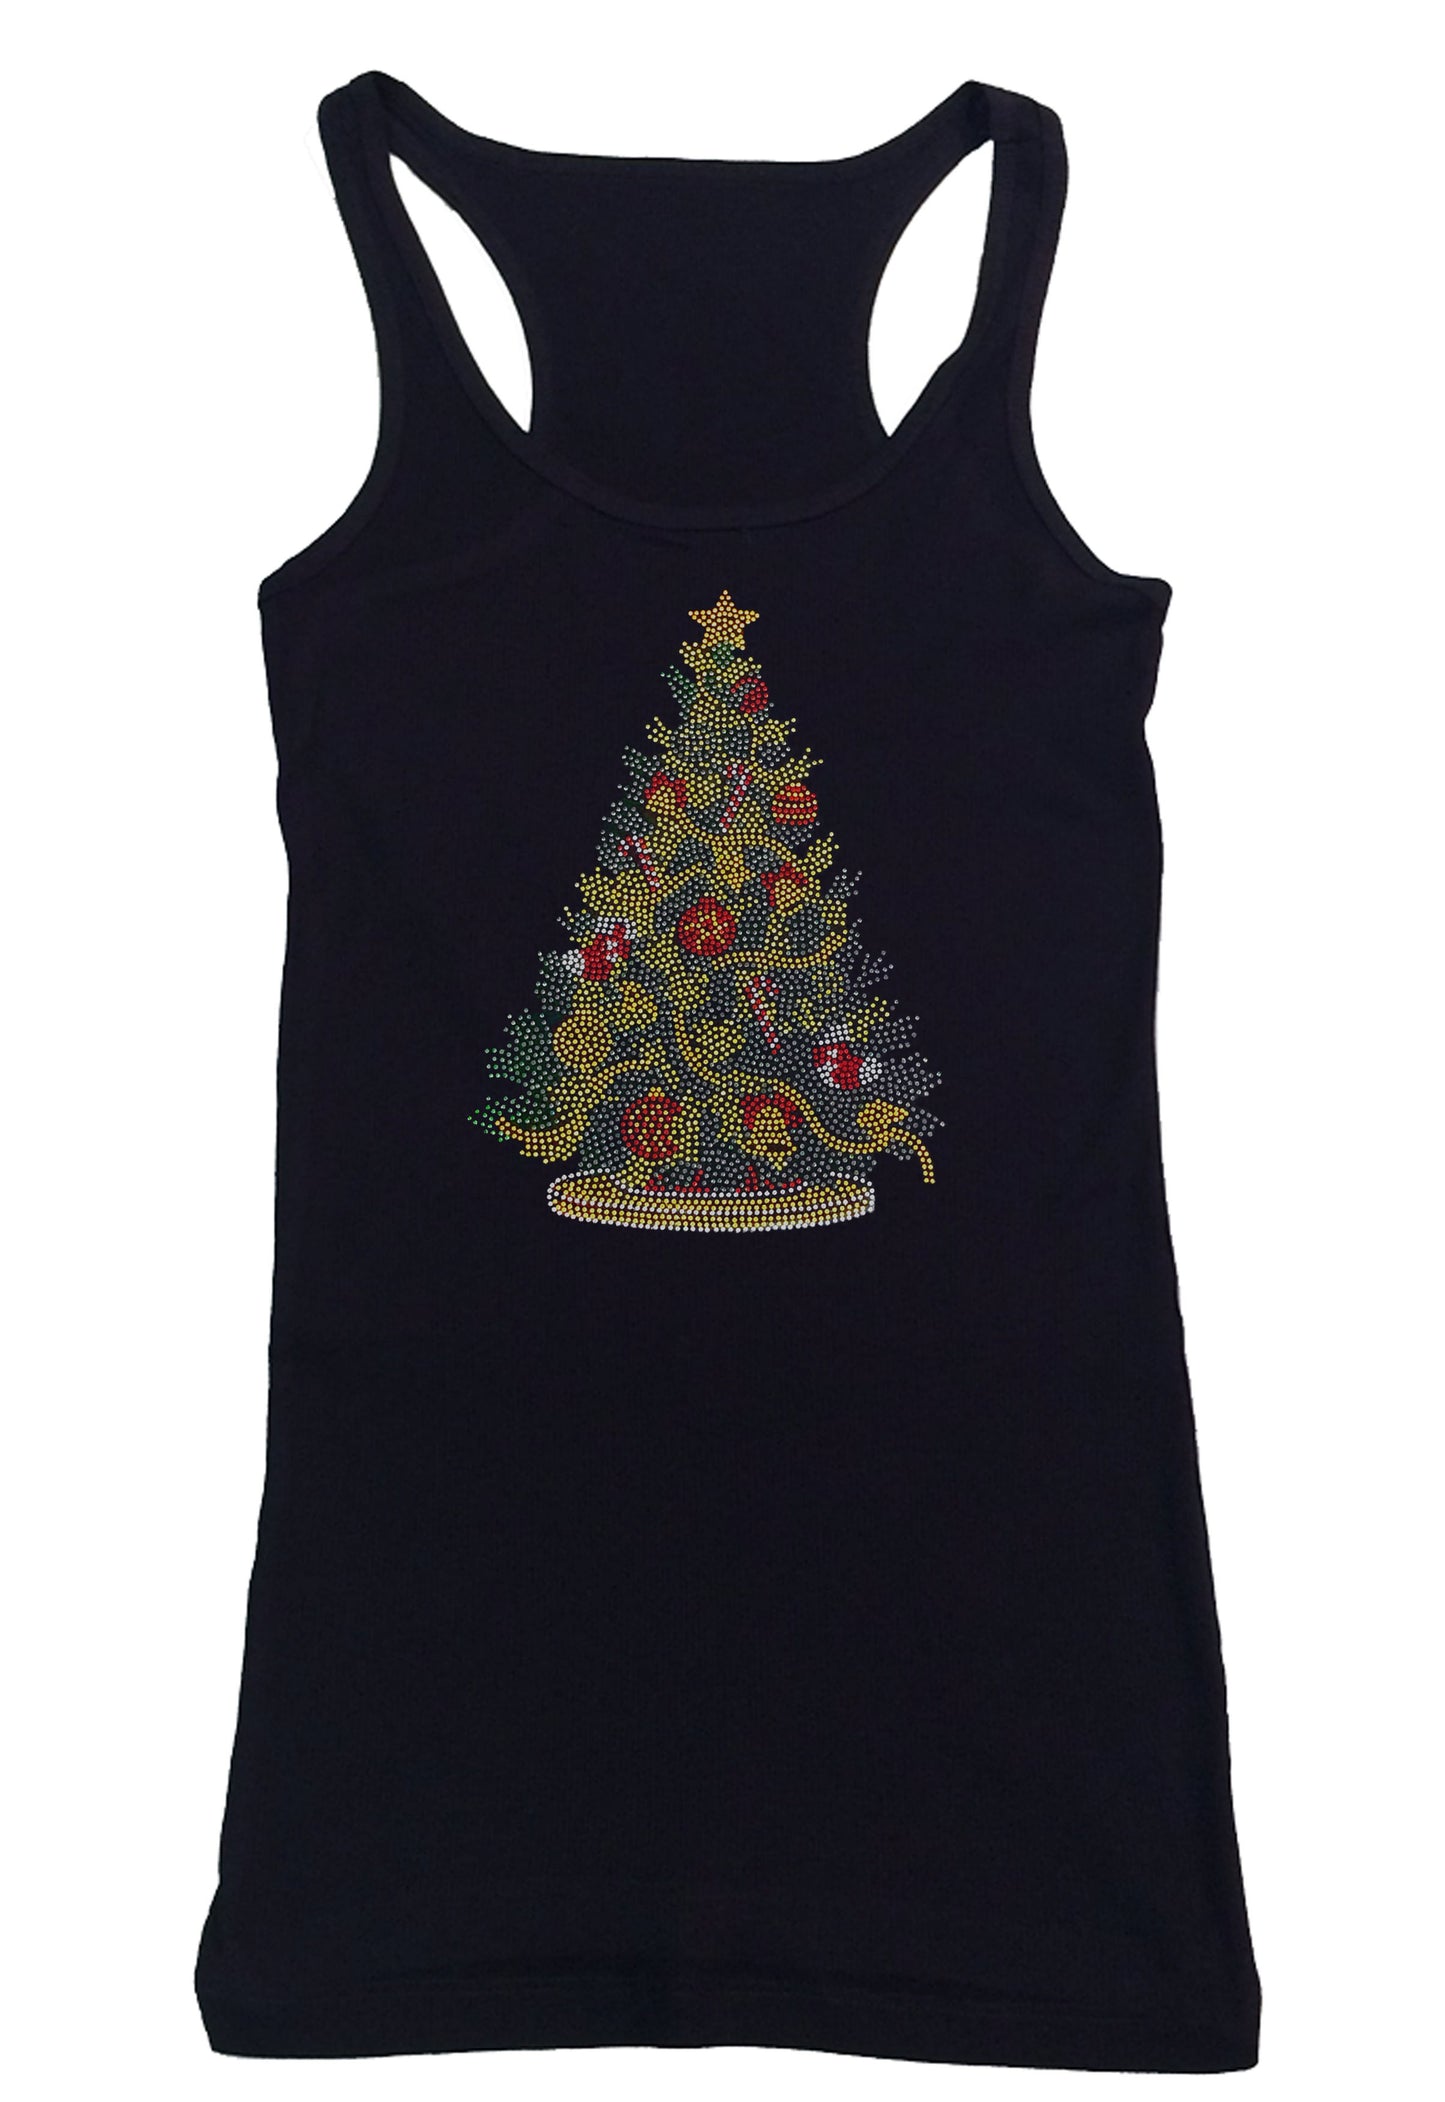 Womens T-shirt with Colorful Christmas Tree in Rhinestuds